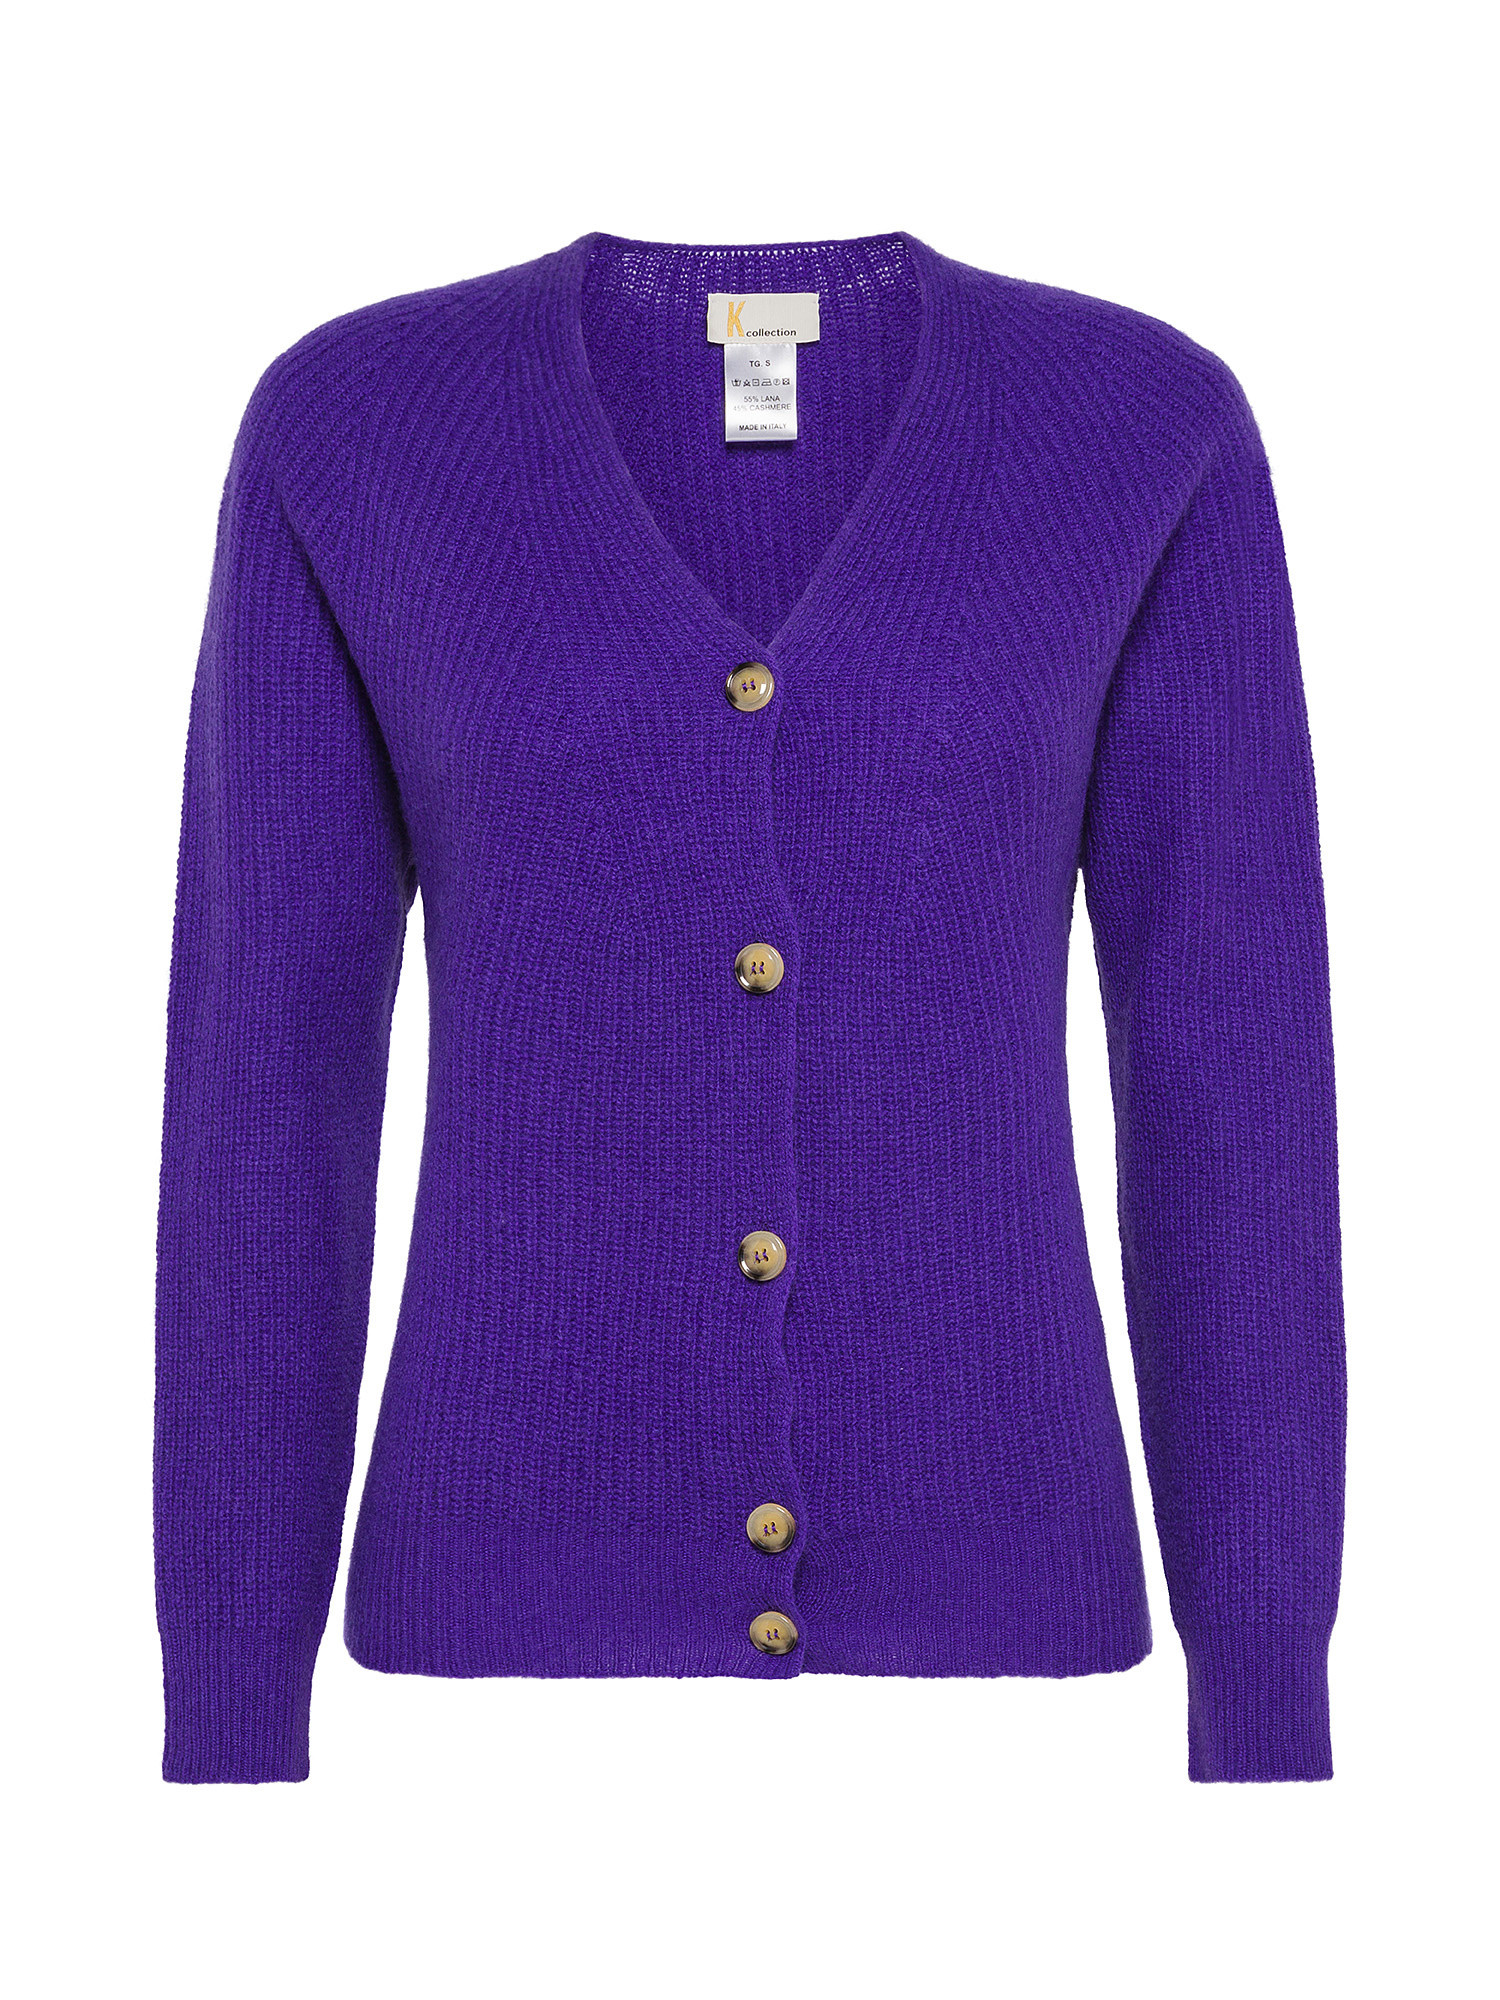 K Collection - Cardigan, Purple, large image number 0